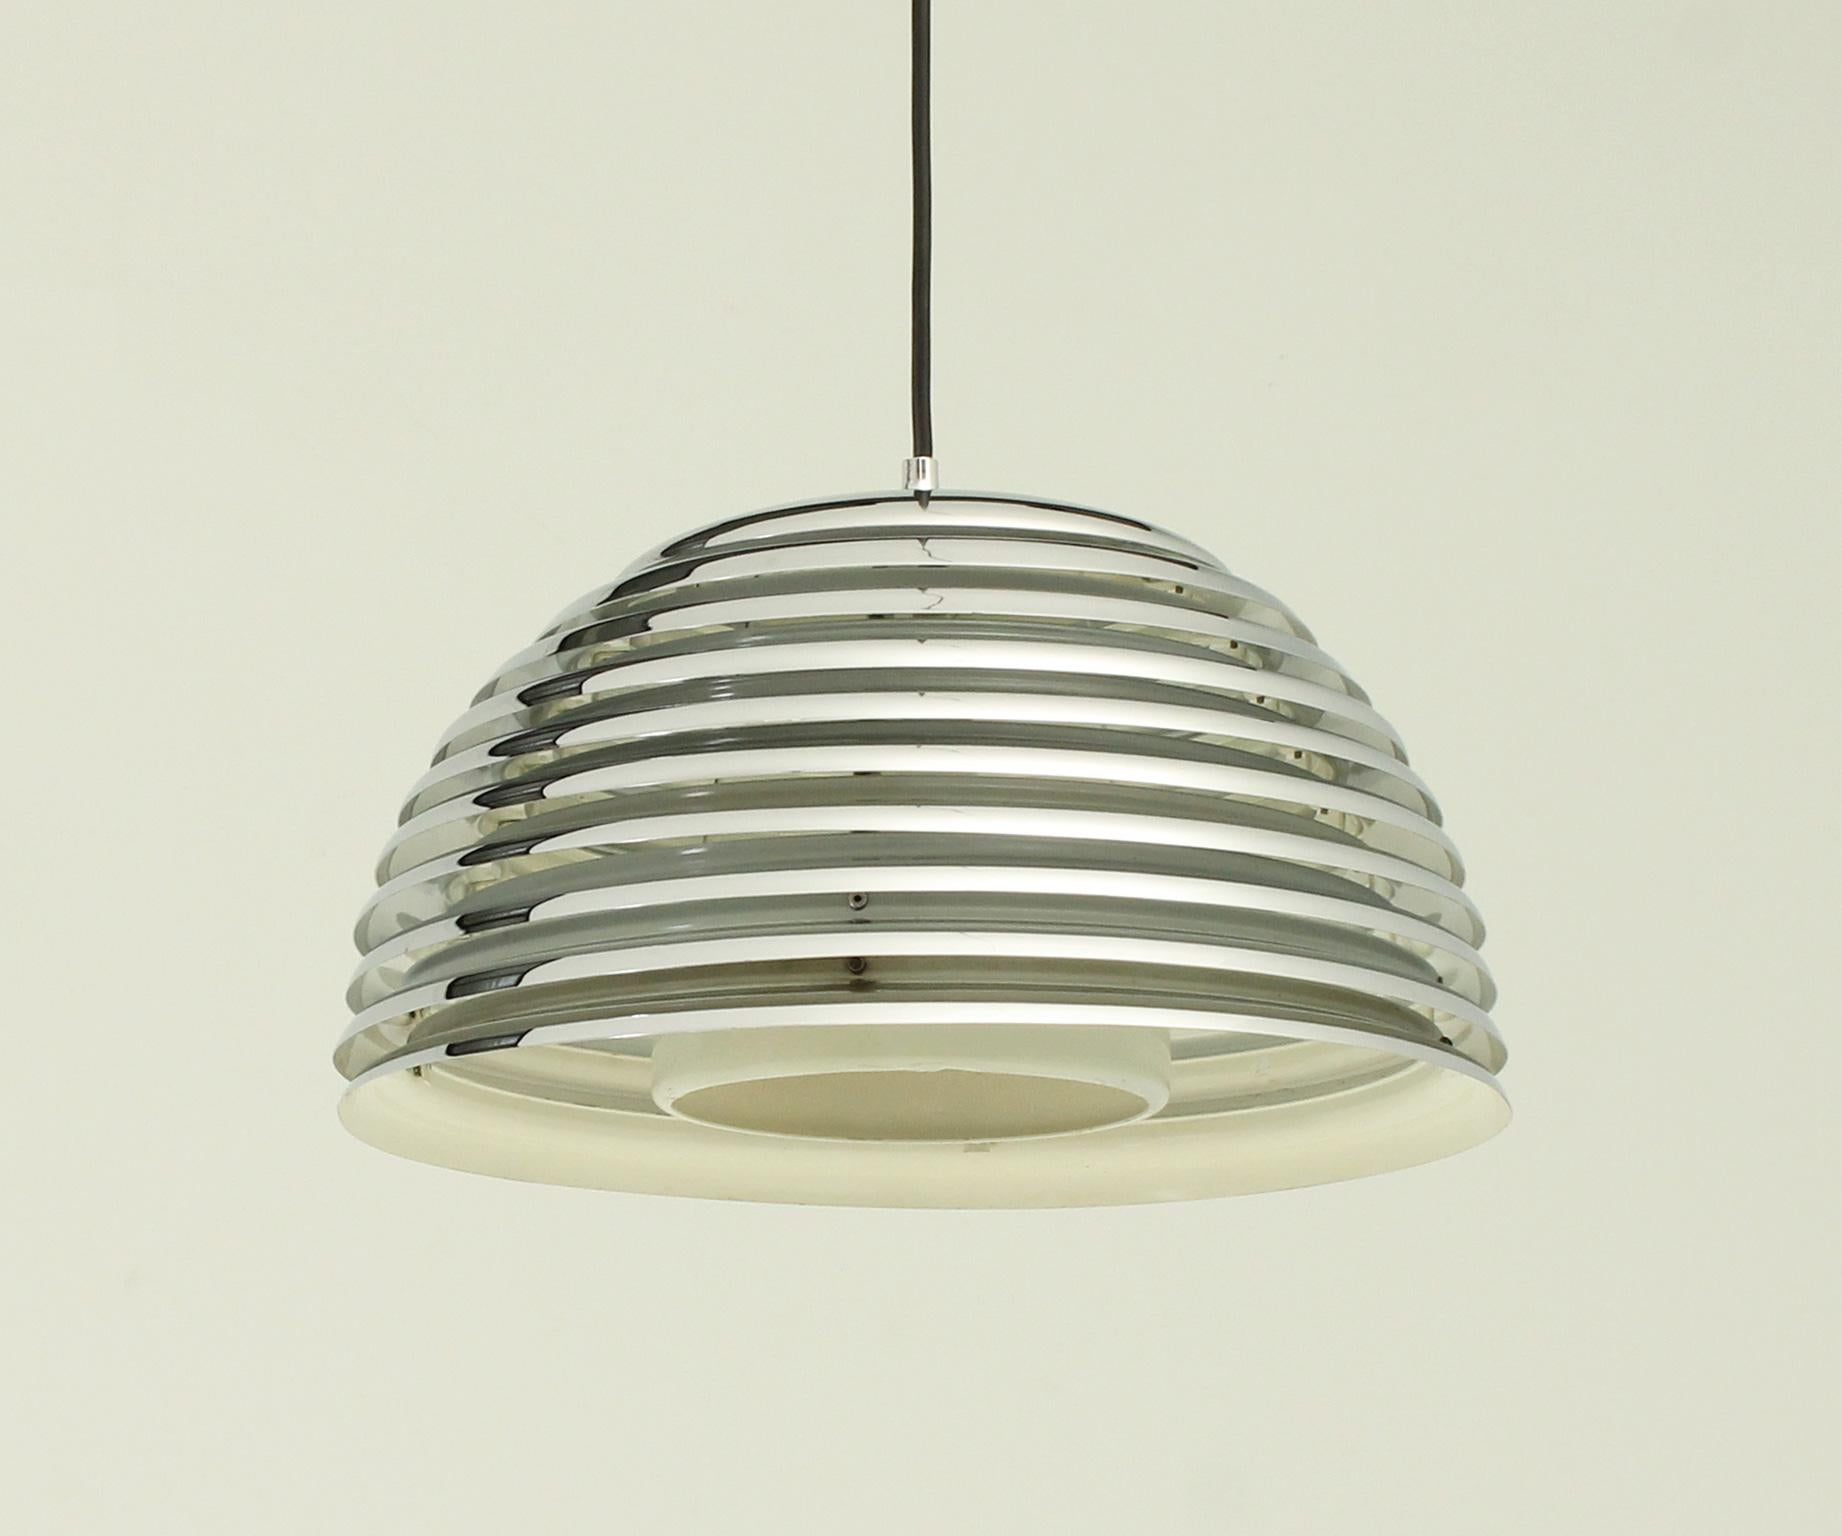 Pendant lamp model 5648 designed by Kazuo Motozawa in 1972 for Staff, Germany. Chromed plated and enameled metal construction.